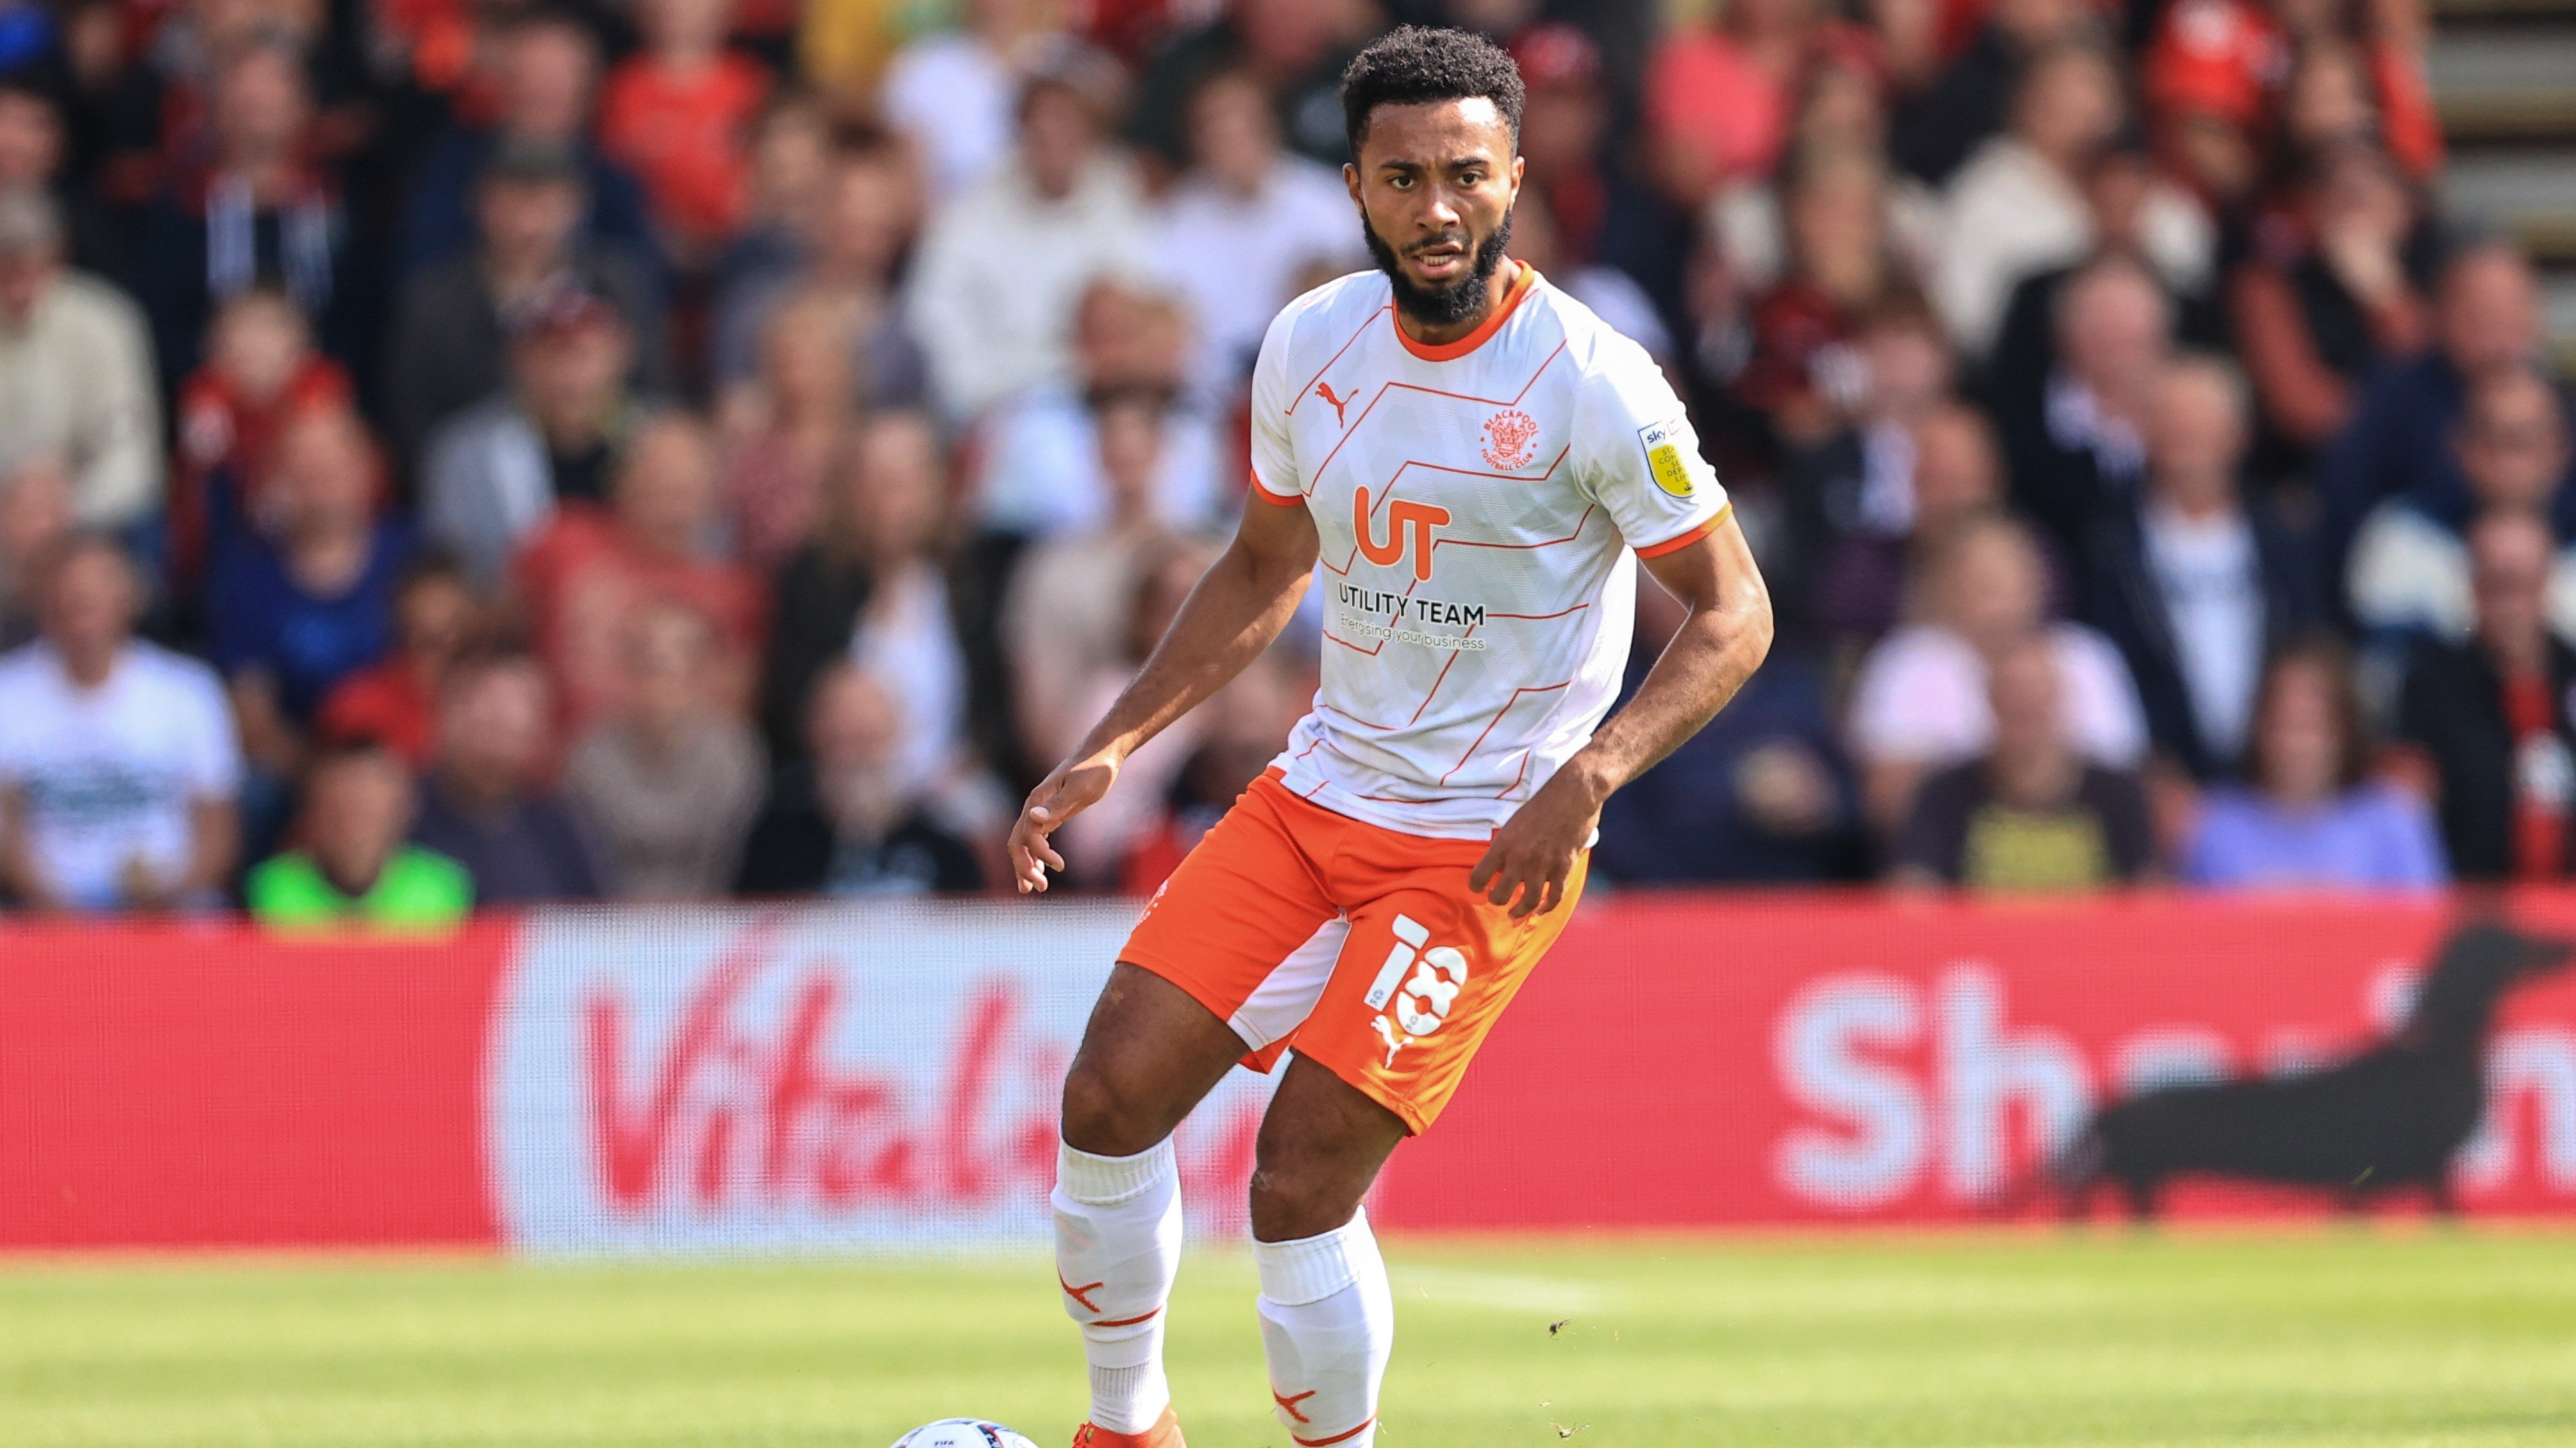 Critchley: You Can't Underestimate Them. Blackpool Football Club